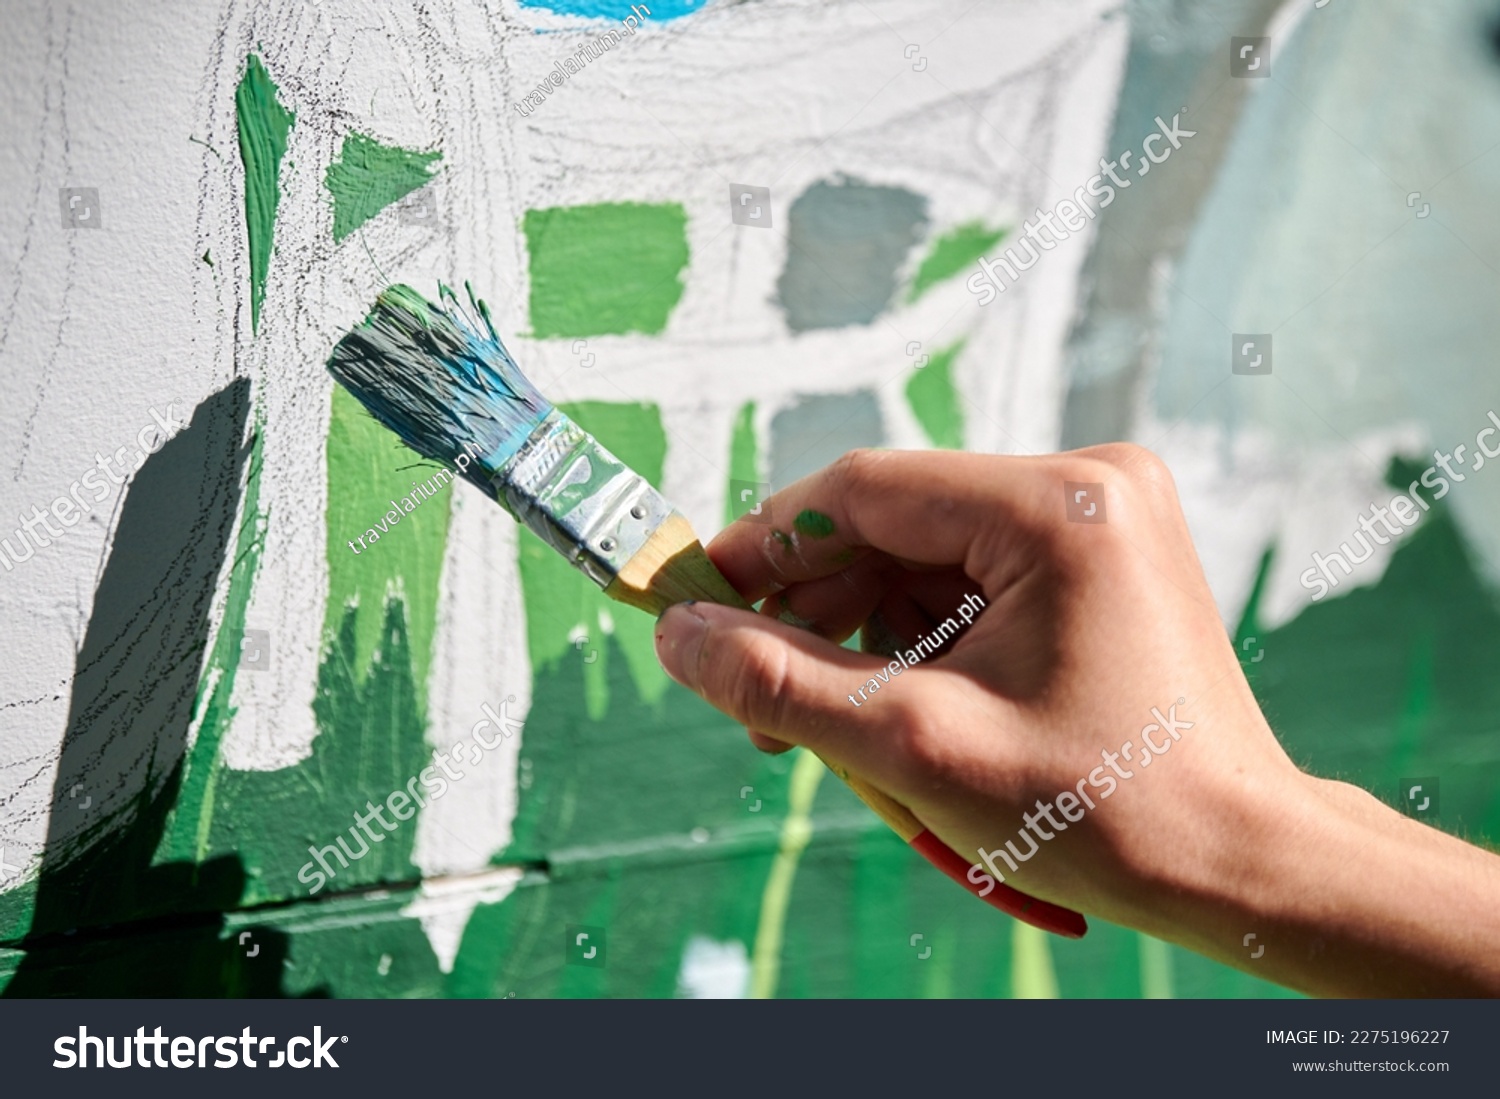 Girl artist hand holds paint brush and draws green nature landscape on white canvas at outdoor art painting festival, paintings art picture process. Woman artist paints atmospheric surreal picture #2275196227